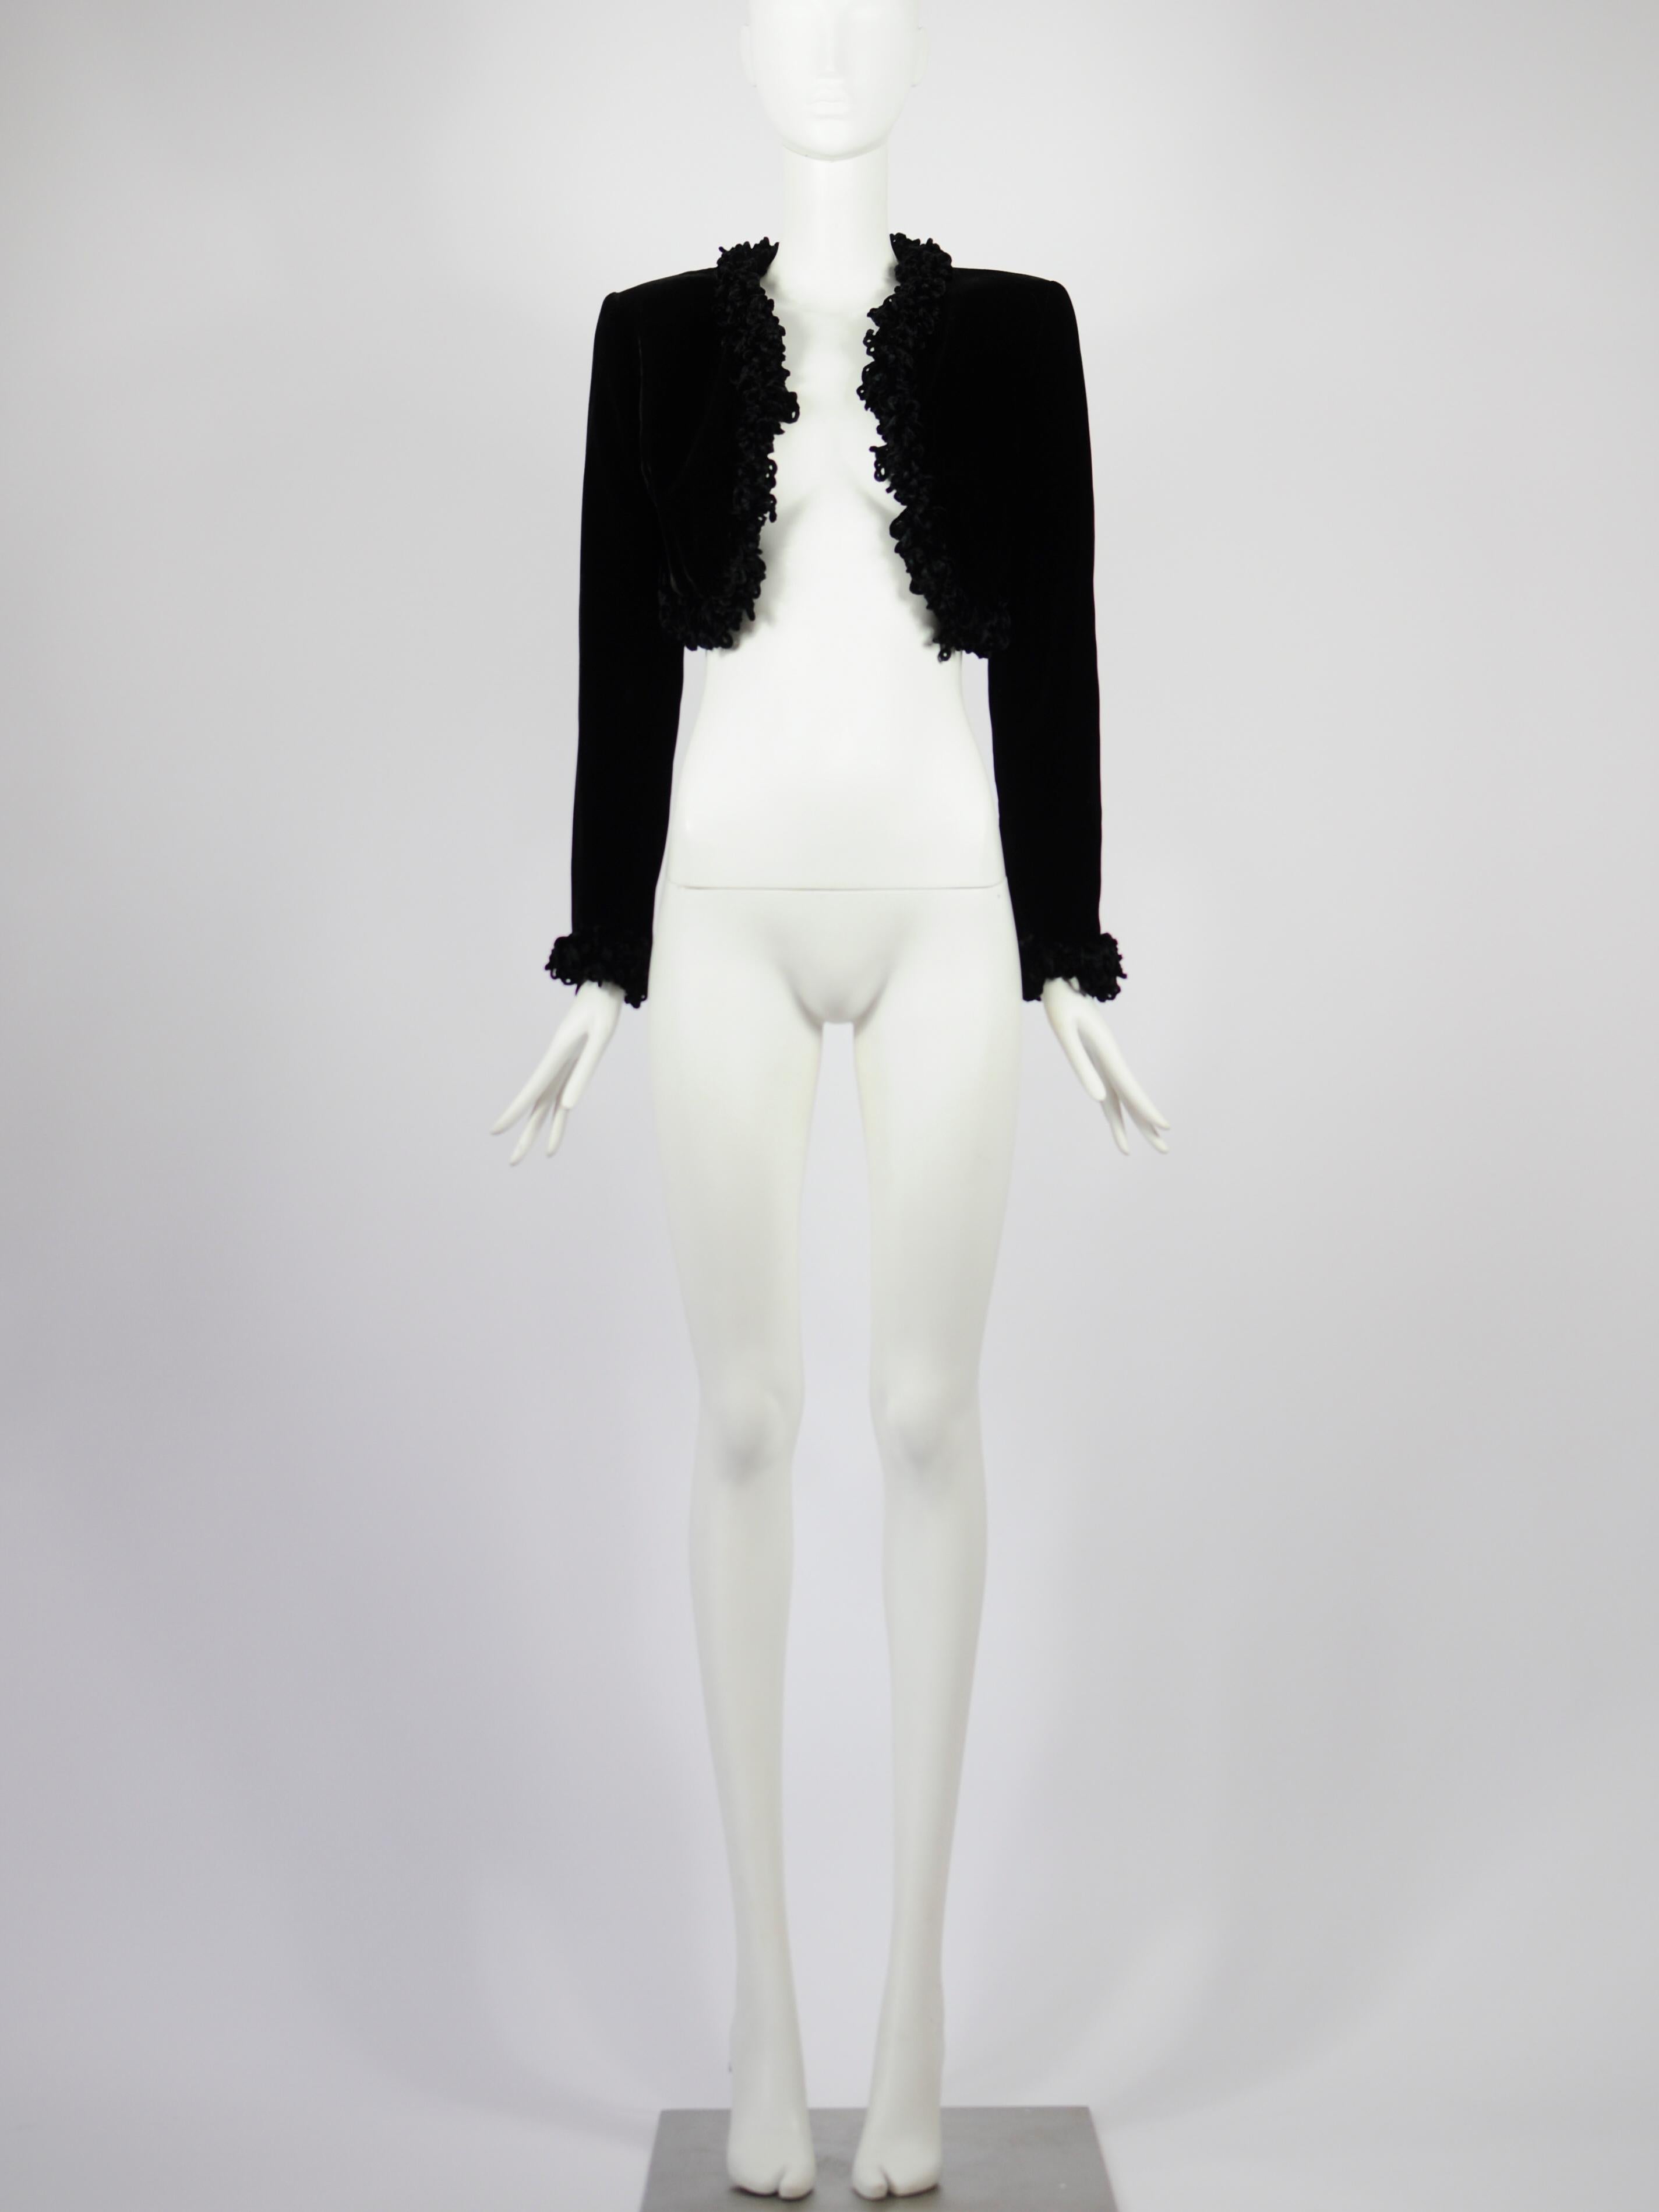 Oliver by Valentino vintage cropped bolero jacket in soft black velvet with chenille fringes on the bottom and sleeves. Truly a high end vintage piece, in perfect condition. It would make a great item for a fancy dinner party and could work over a